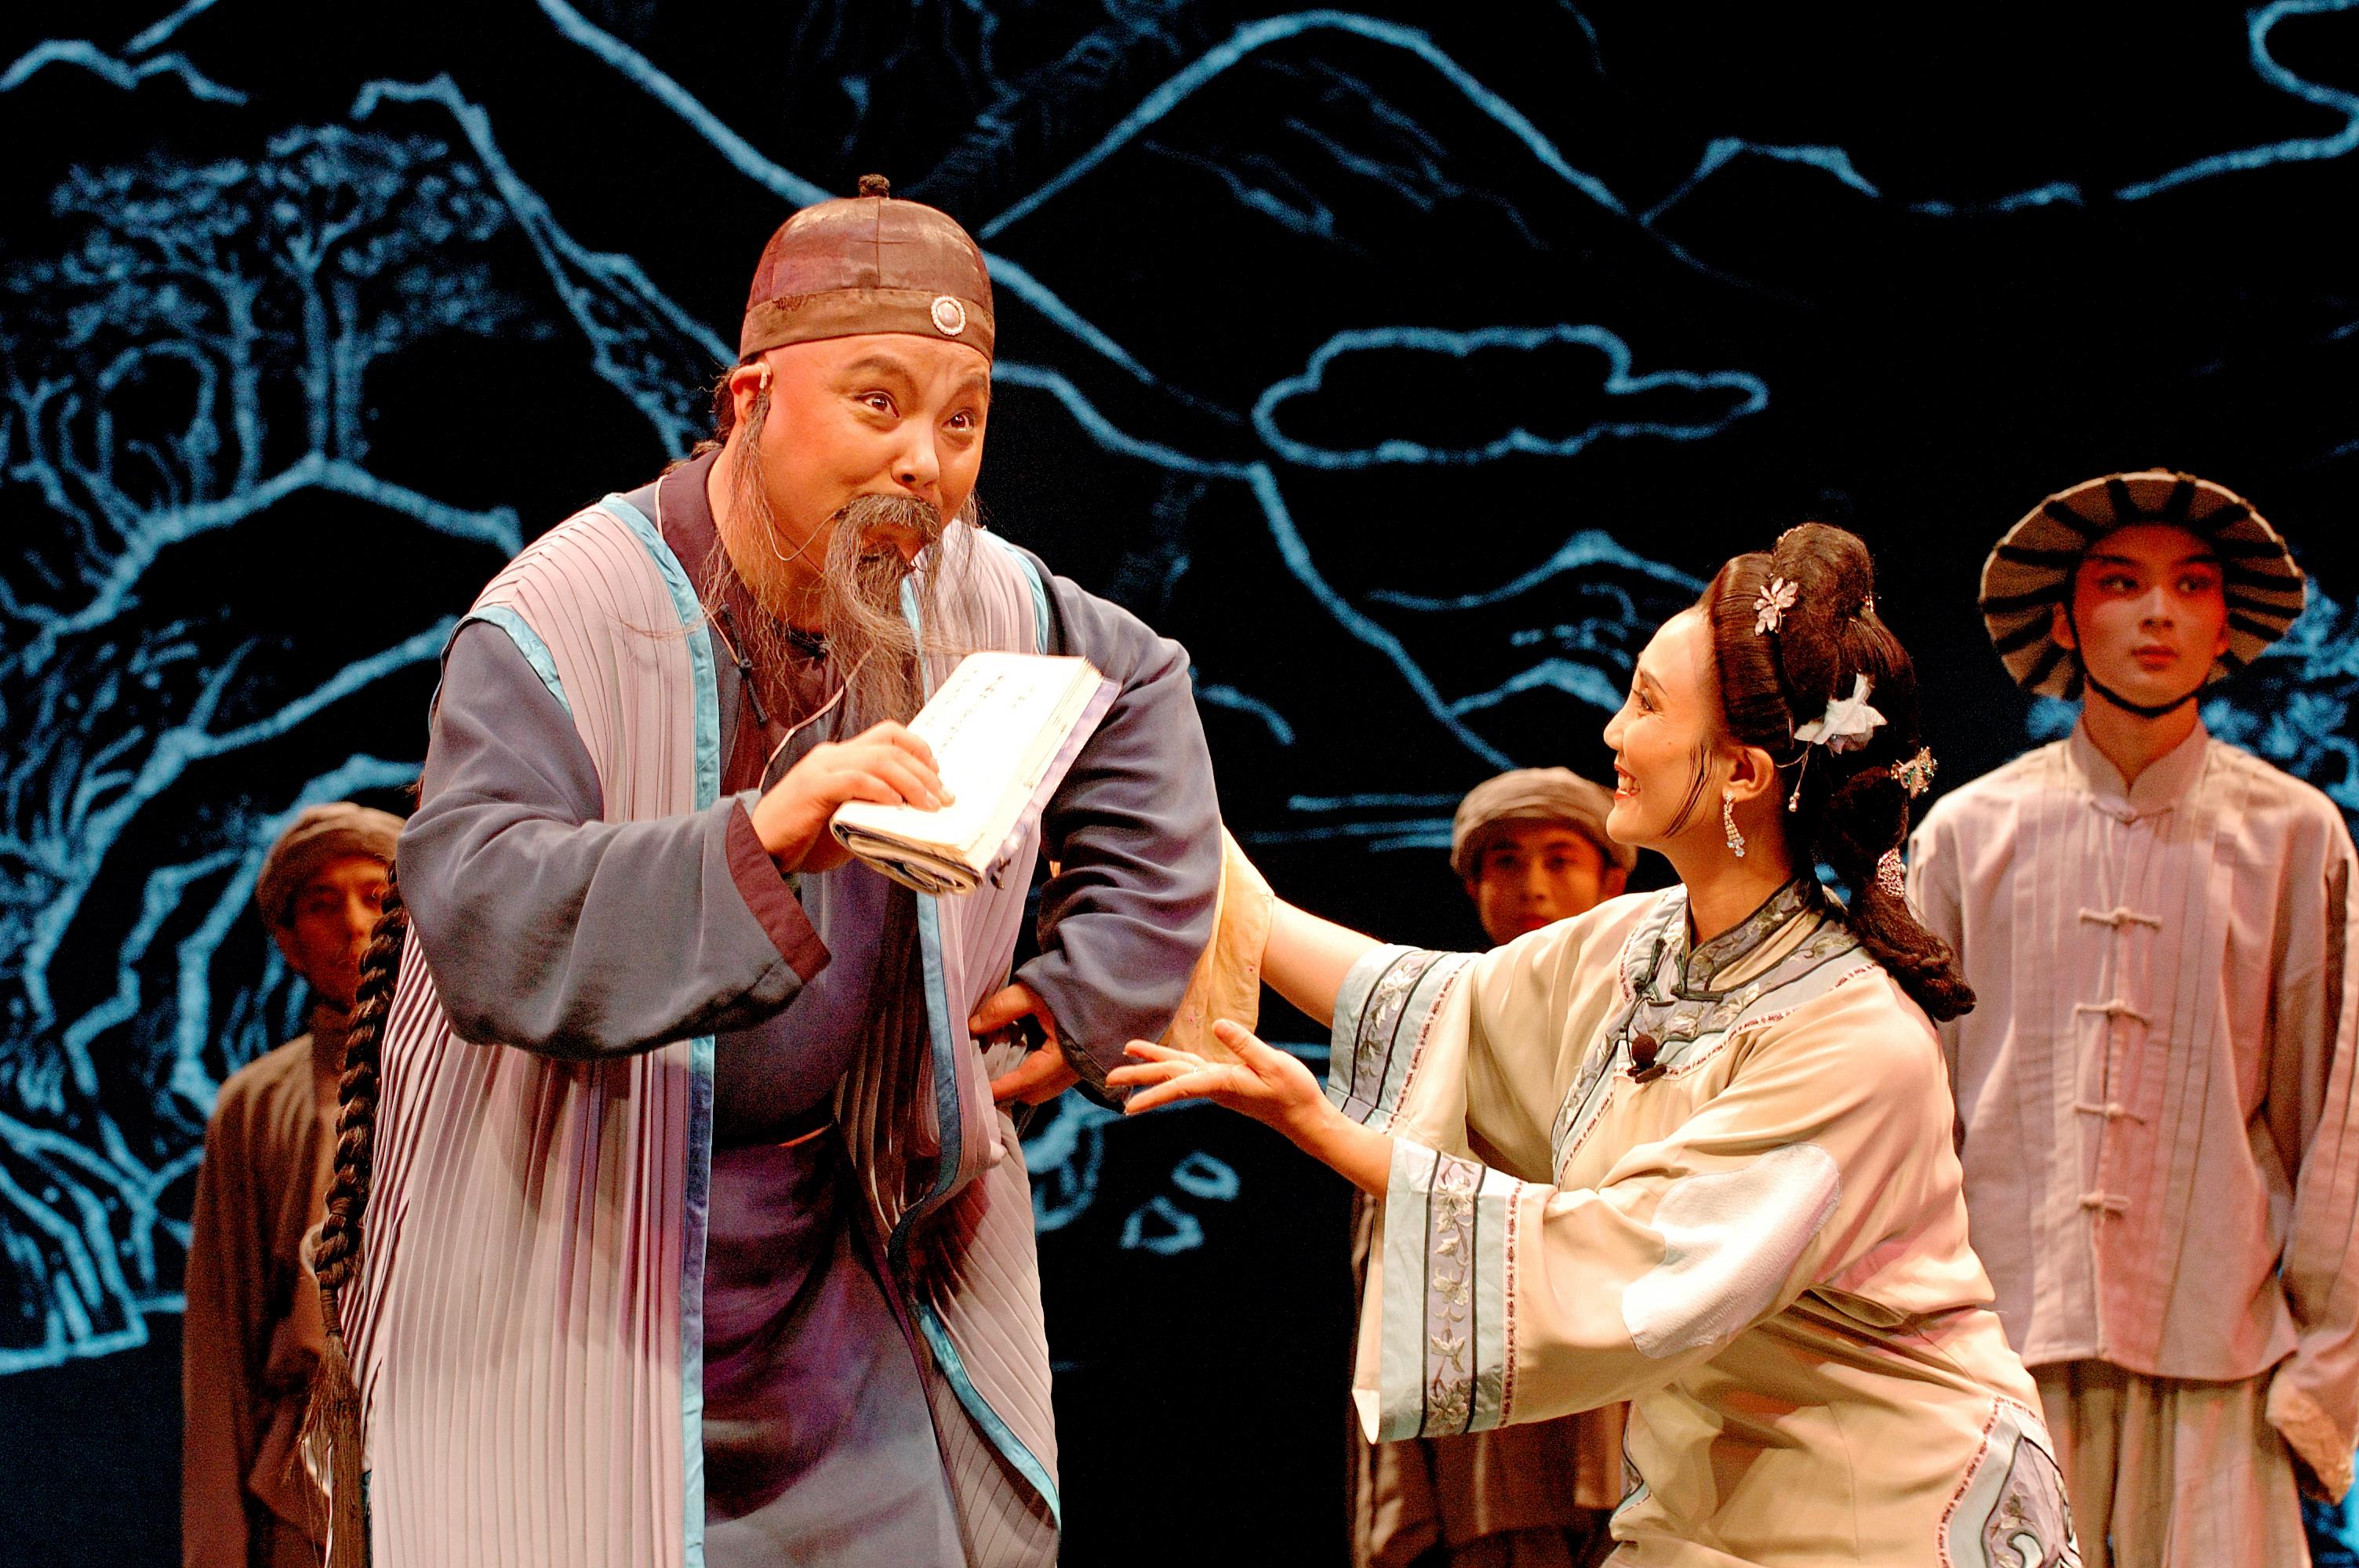 The Sichuan Opera Troupe, upon the invitation of the Leisure and Cultural Services Department, will stage two iconic plays and a selection of brilliant excerpts for three consecutive nights starting from June 30 (Friday) at this year's Chinese Opera Festival. Photo shows a scene of Excerpt "Holding a Candle to Burn His Books".